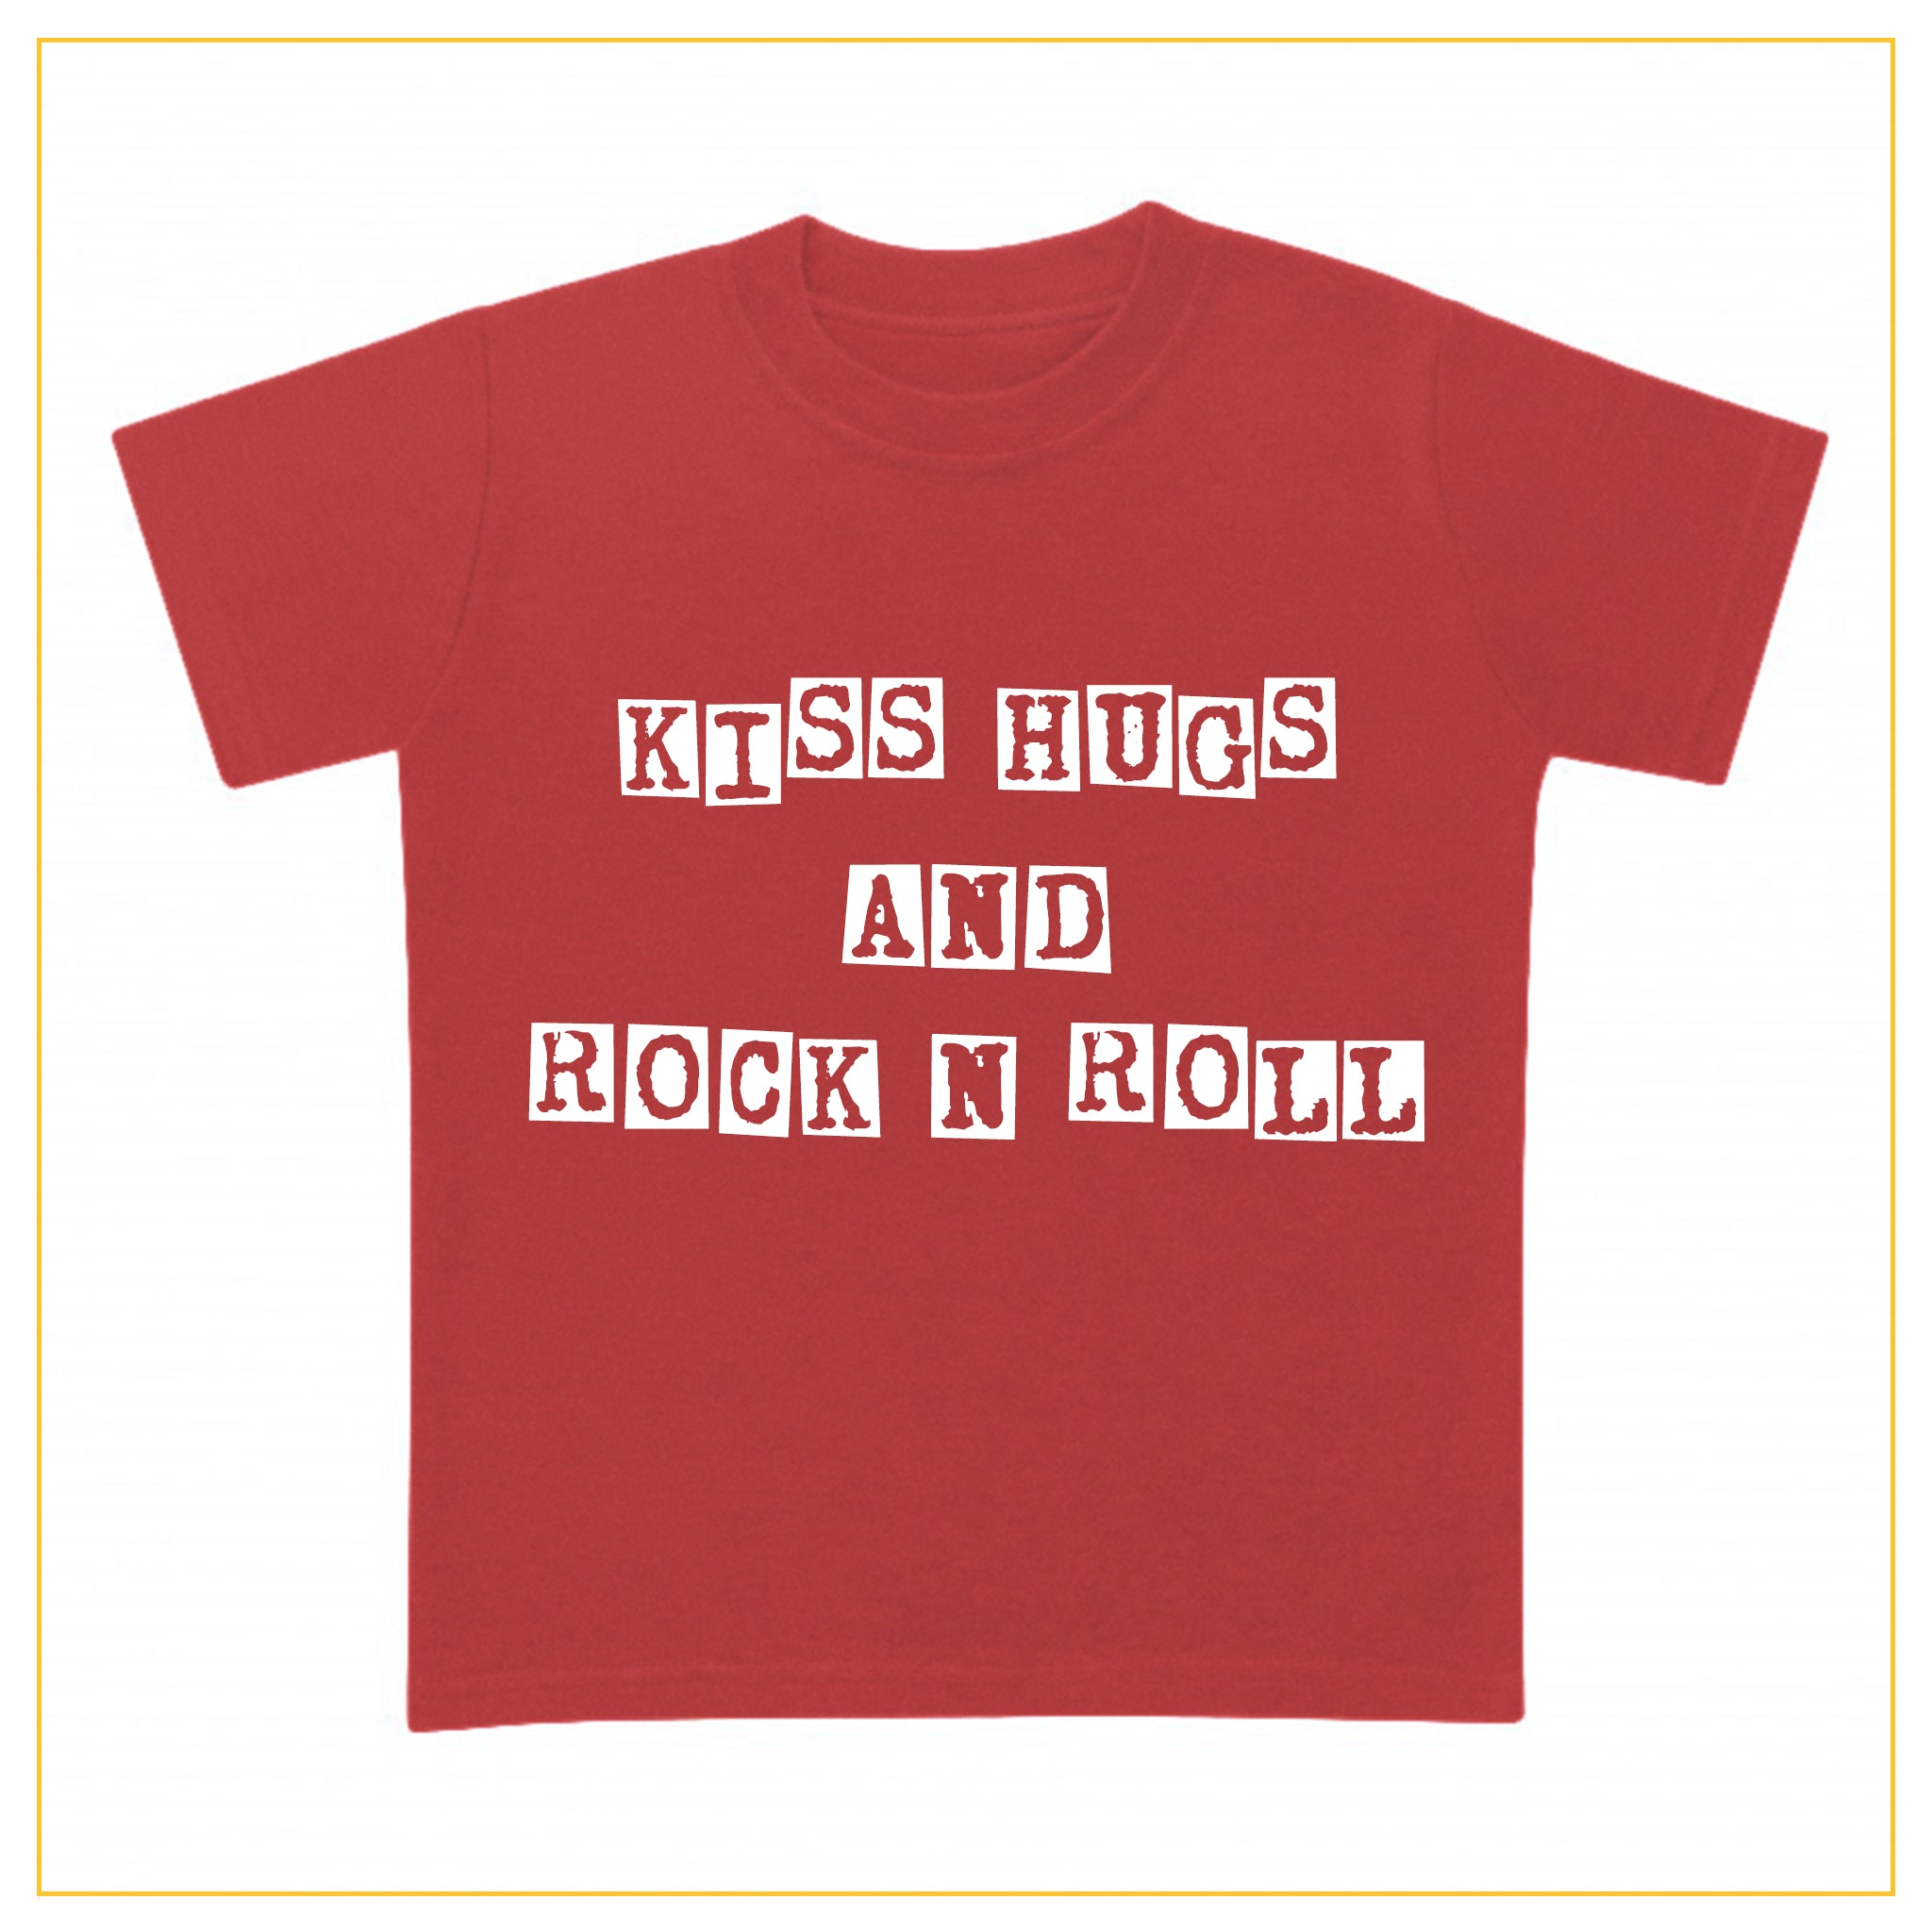 kiss hugs and rock n roll kids t-shirt in red